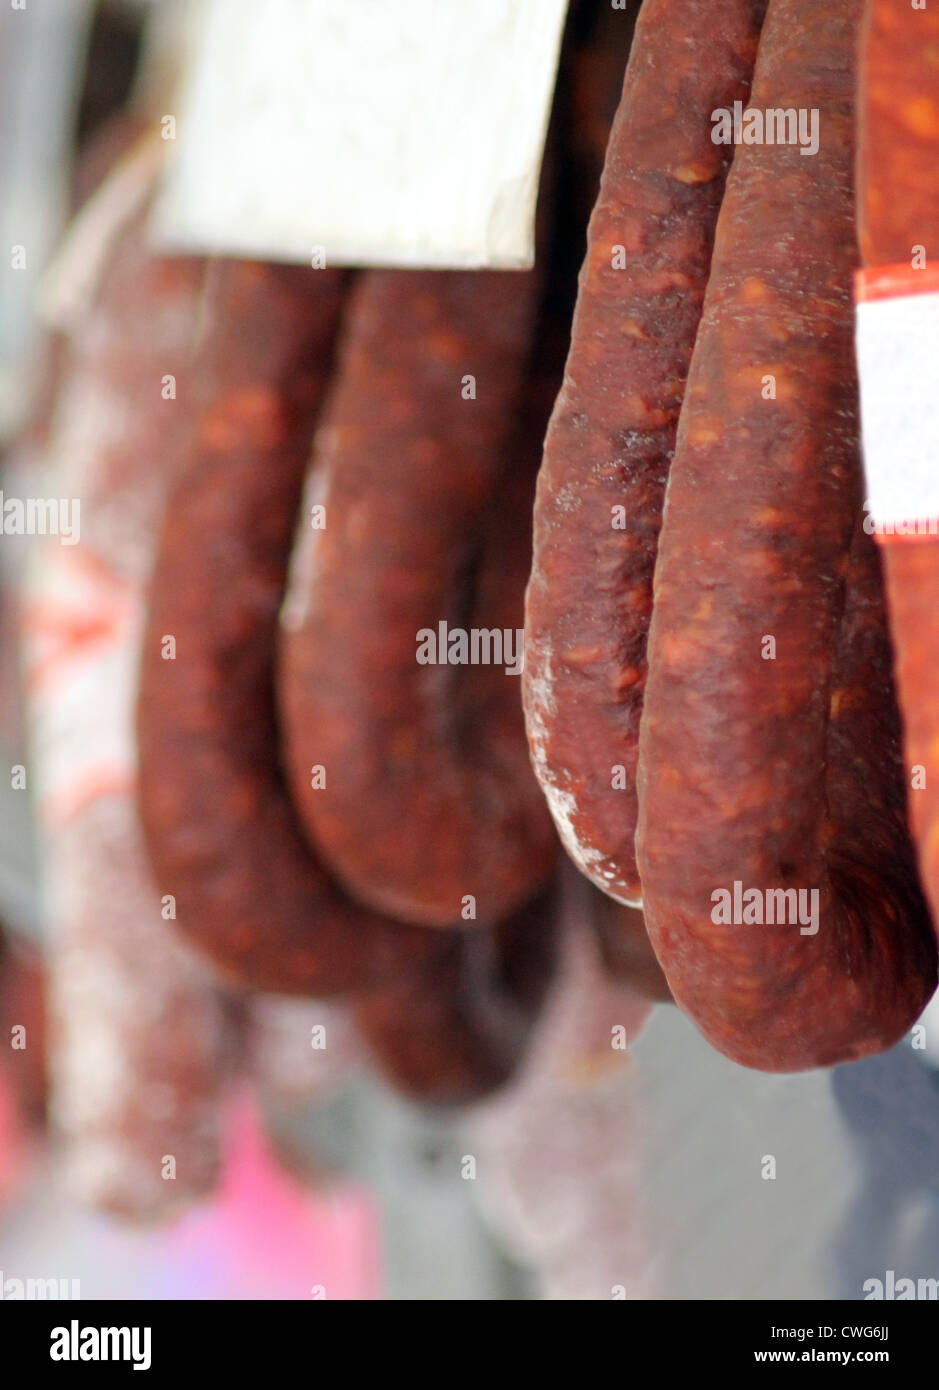 Salami or Chorizo sausages hung from market stall in Spain. Stock Photo